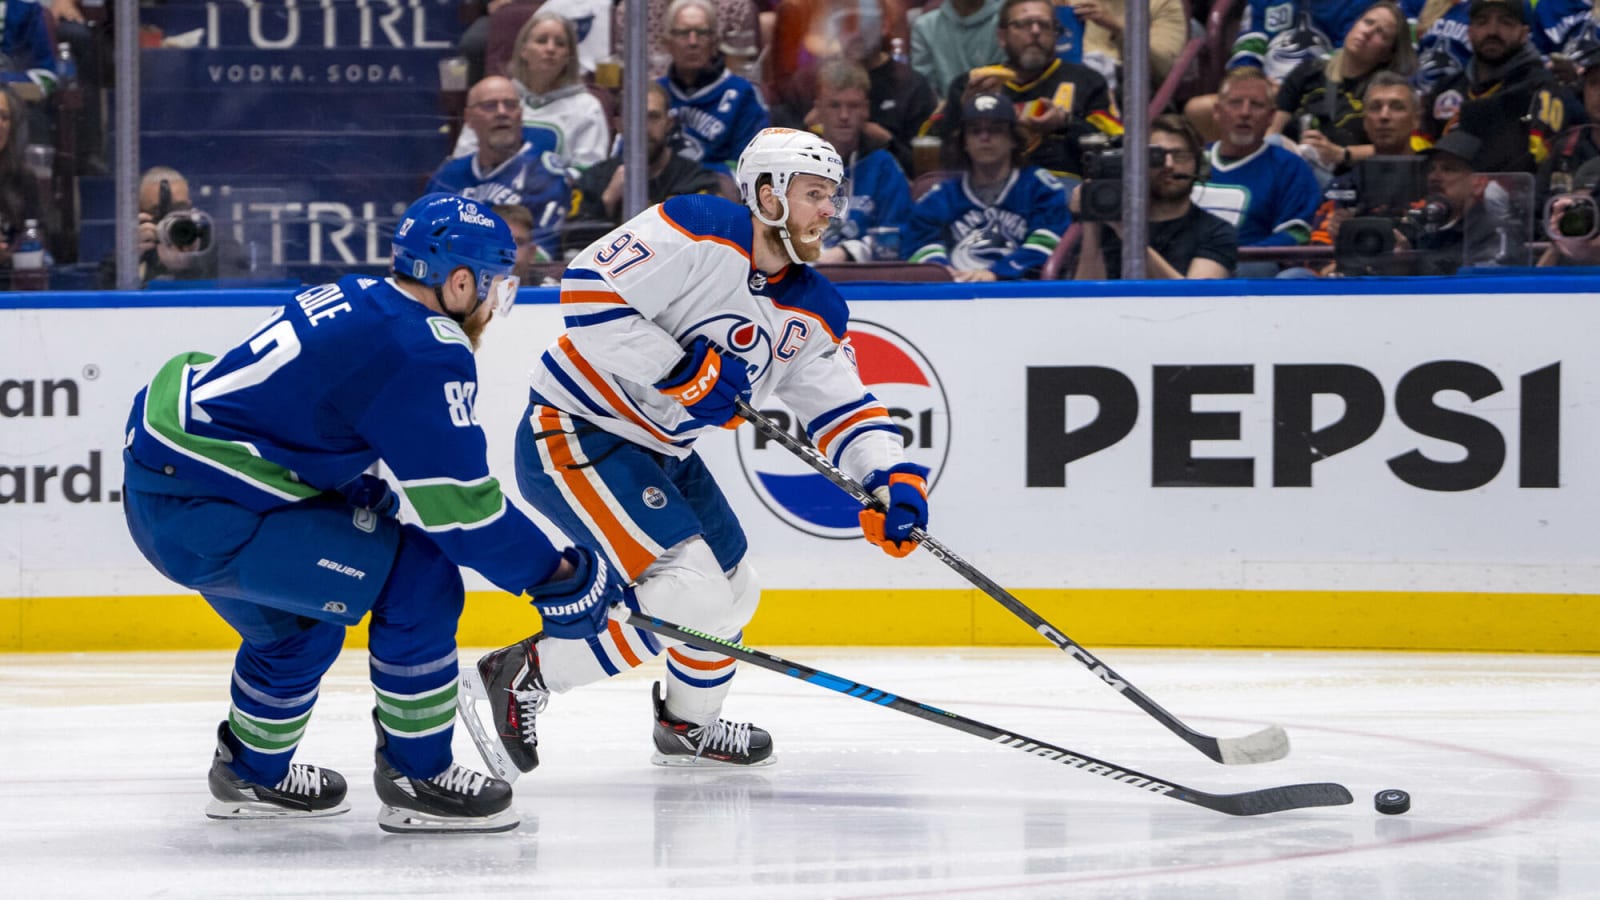  Vancouver Canucks fall 4-3 to Edmonton Oilers in overtime grindfest in game two